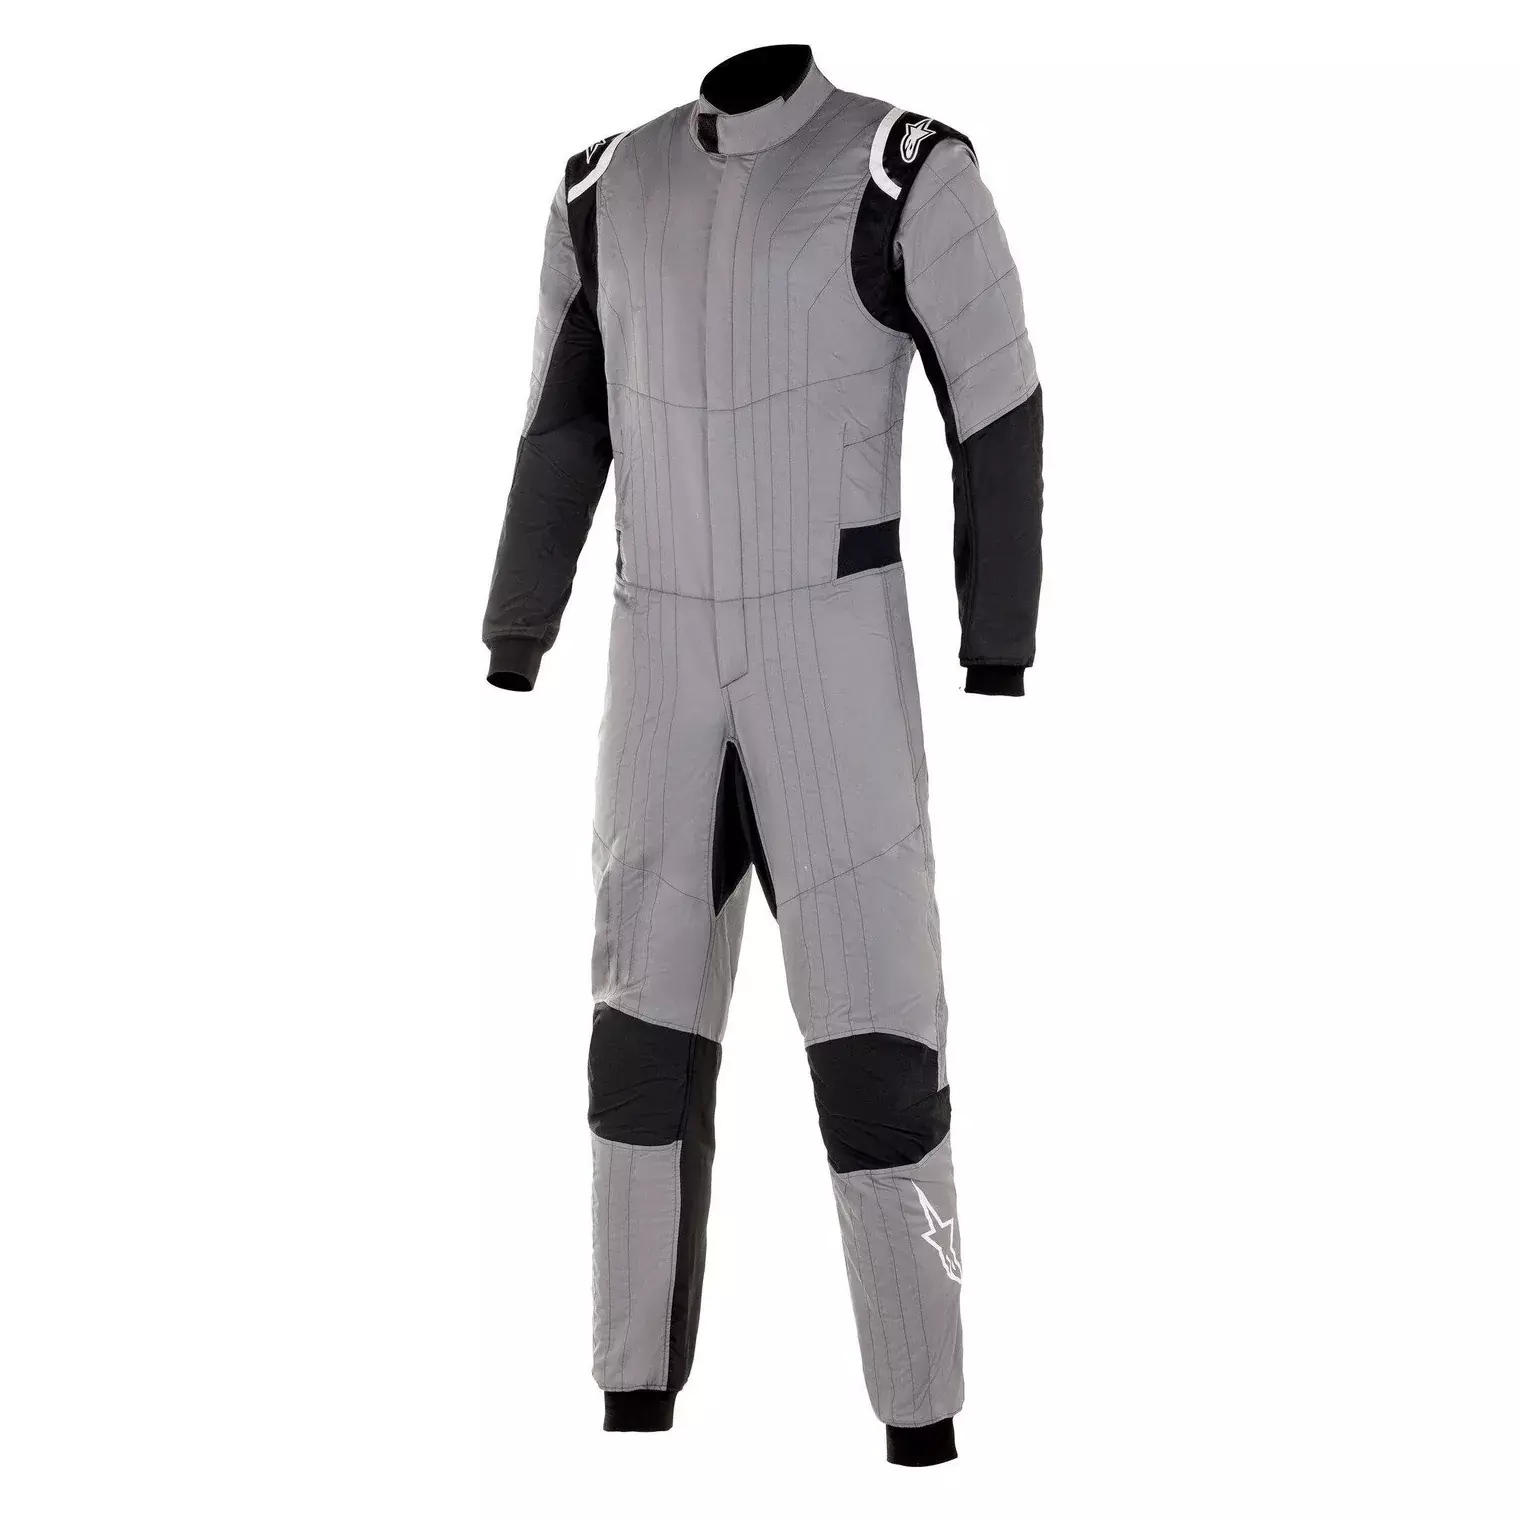 Alpinestars 3350220-971-60 Driving Suit, Hypertech V2, 1-Piece, FIA Approved, Double Layer, Fire Retardant Fabric, Gray / Black, X-Large, Each